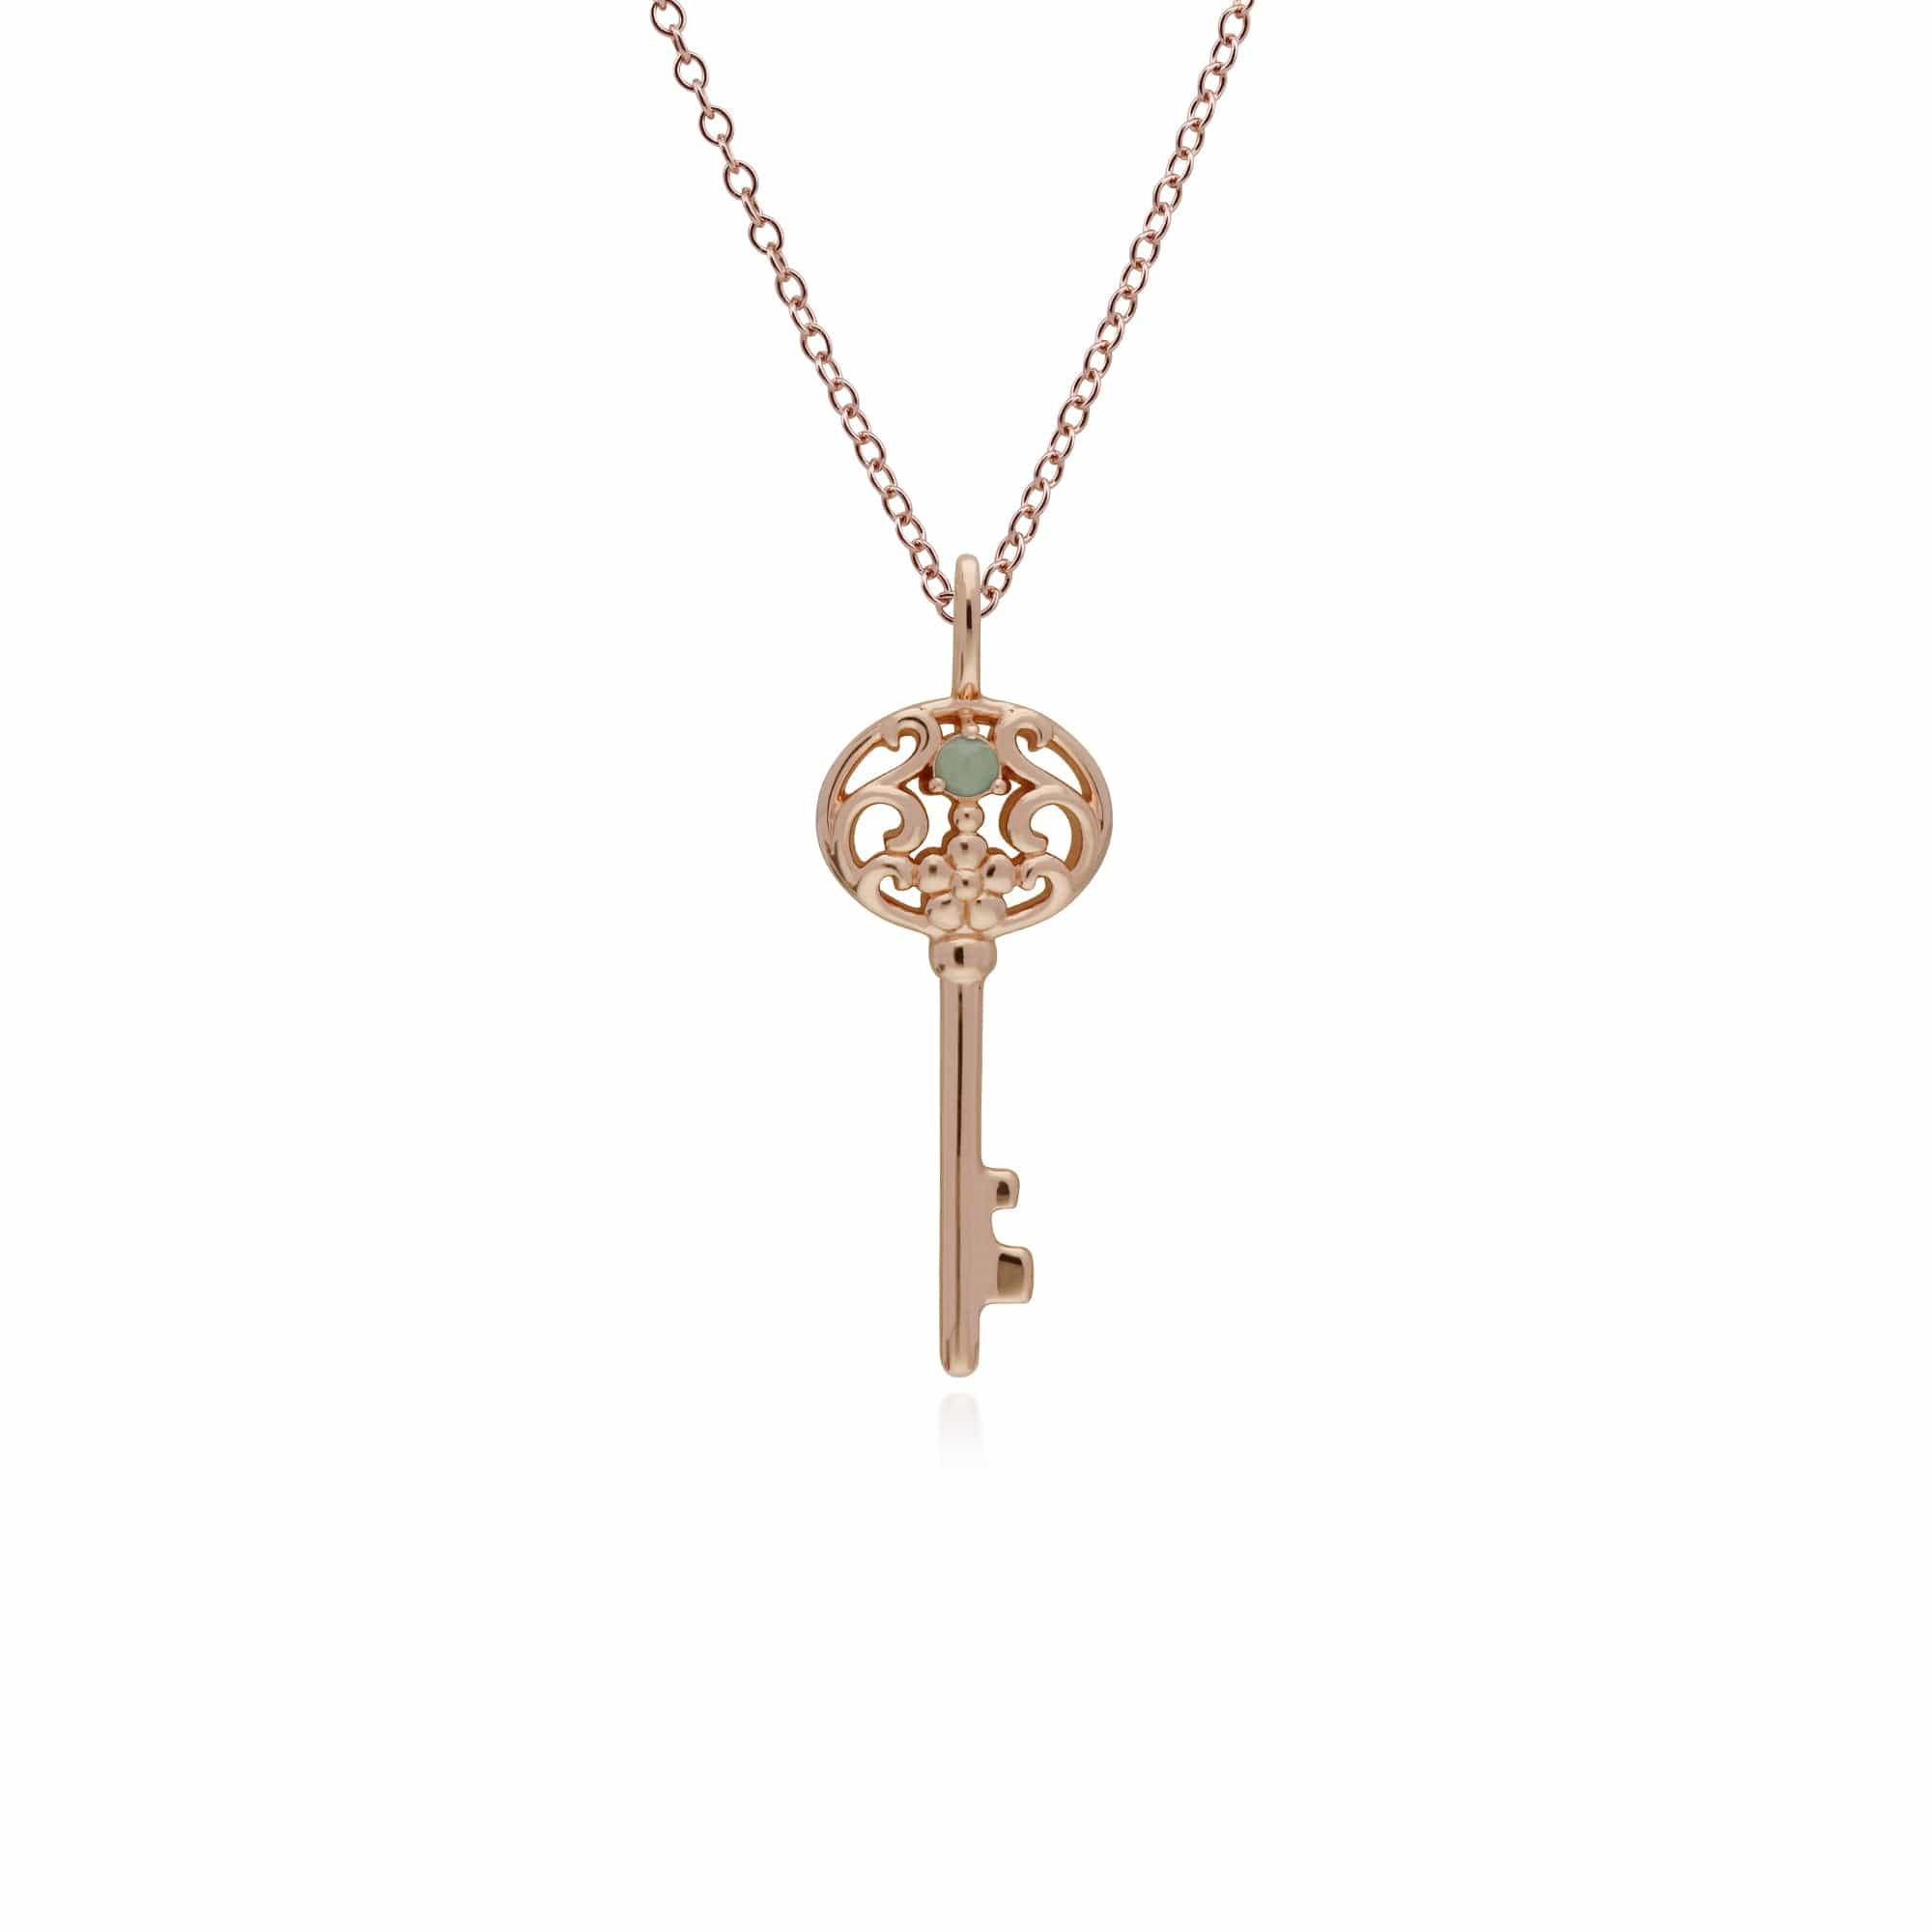 270P026712925-270P026901925 Classic Heart Lock Pendant & Jade Big Key Charm in Rose Gold Plated 925 Sterling Silver 2